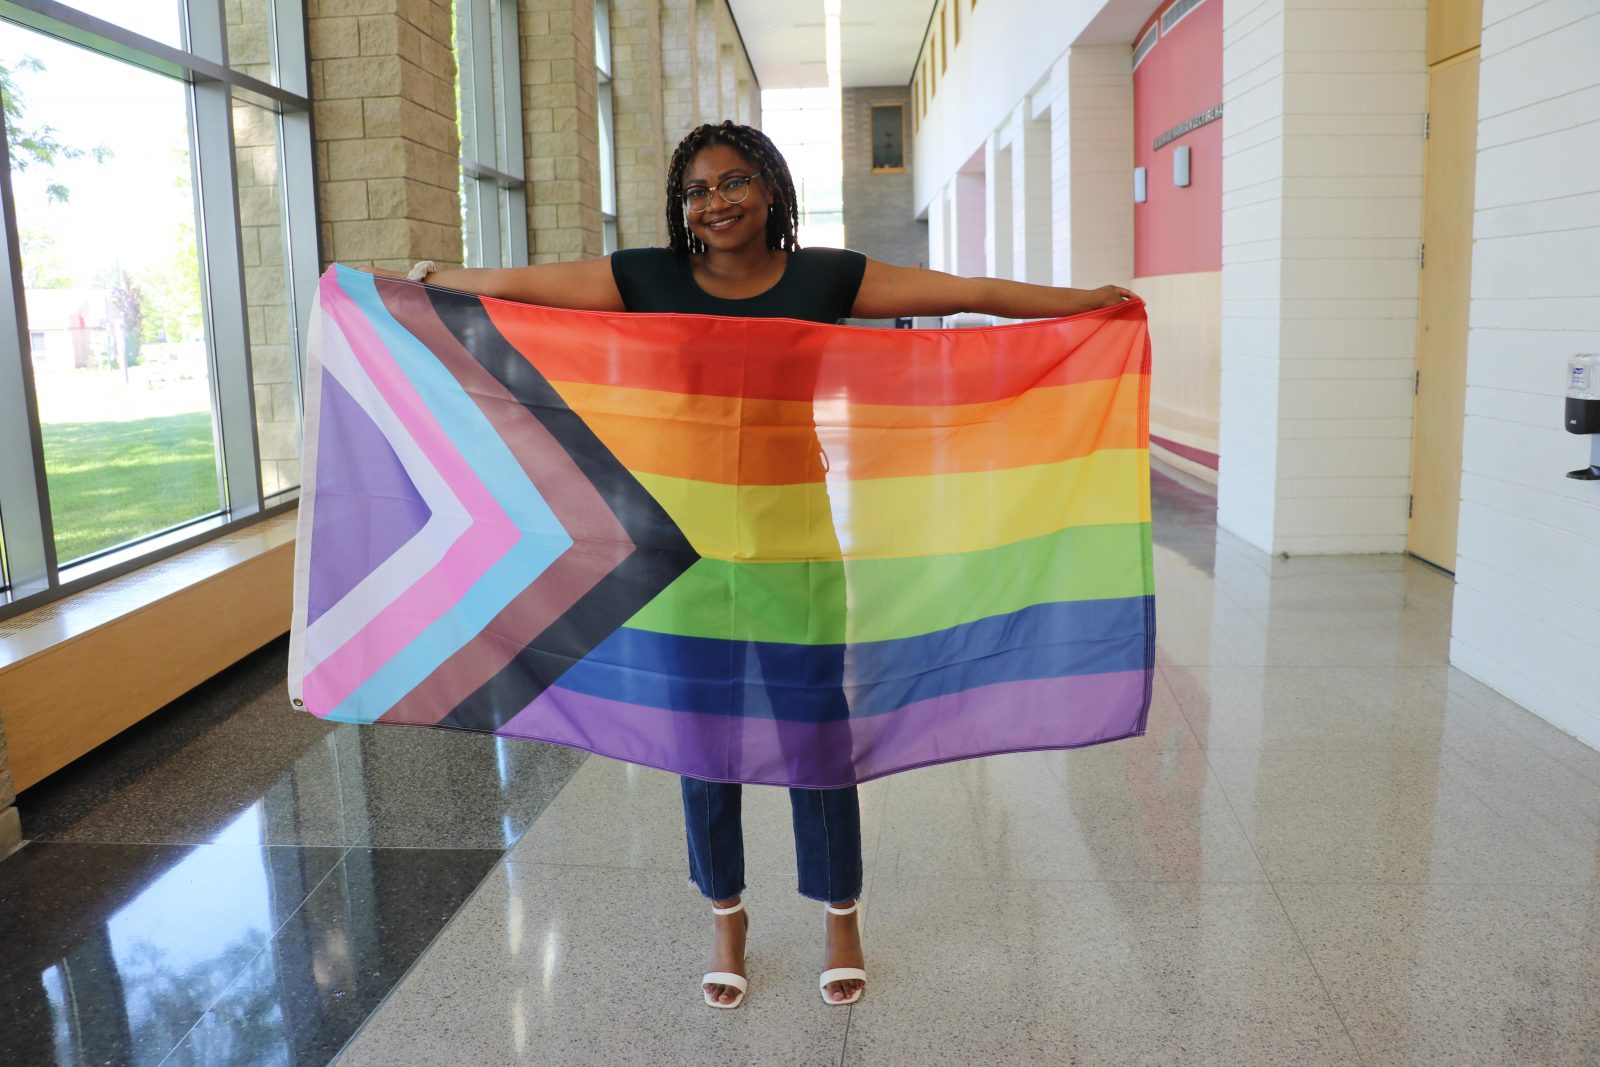 A woman stand in an indoor hallway holding a rainbow-coloured flag that also has multicoloured chevrons at one end.